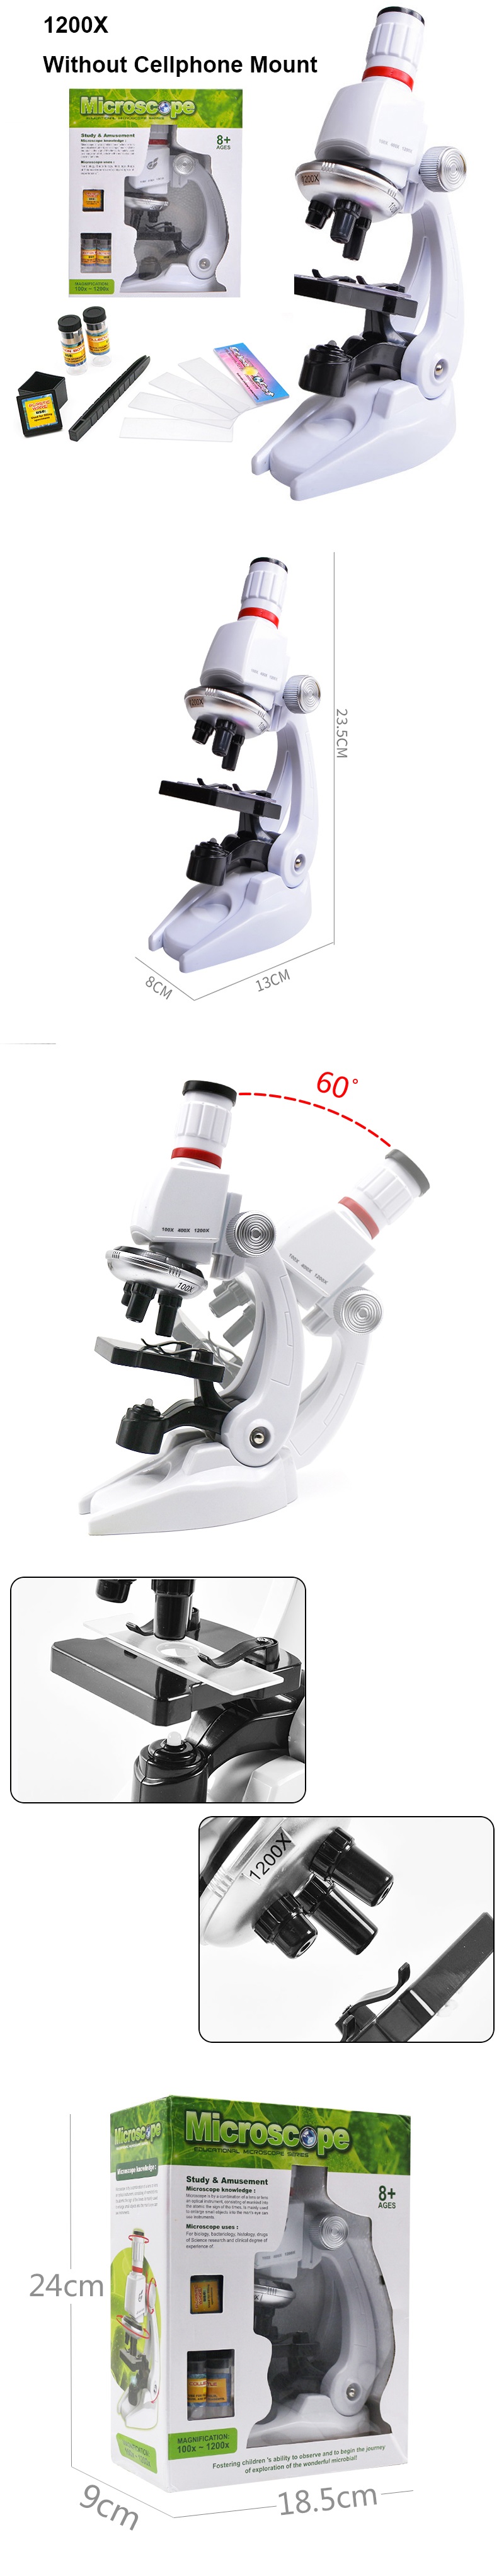 450X-or-1200X-Children-Toy-Biological-Microscope-Set-Gift-Monocular-Microscope-Biological-Science-Ex-1594472-6